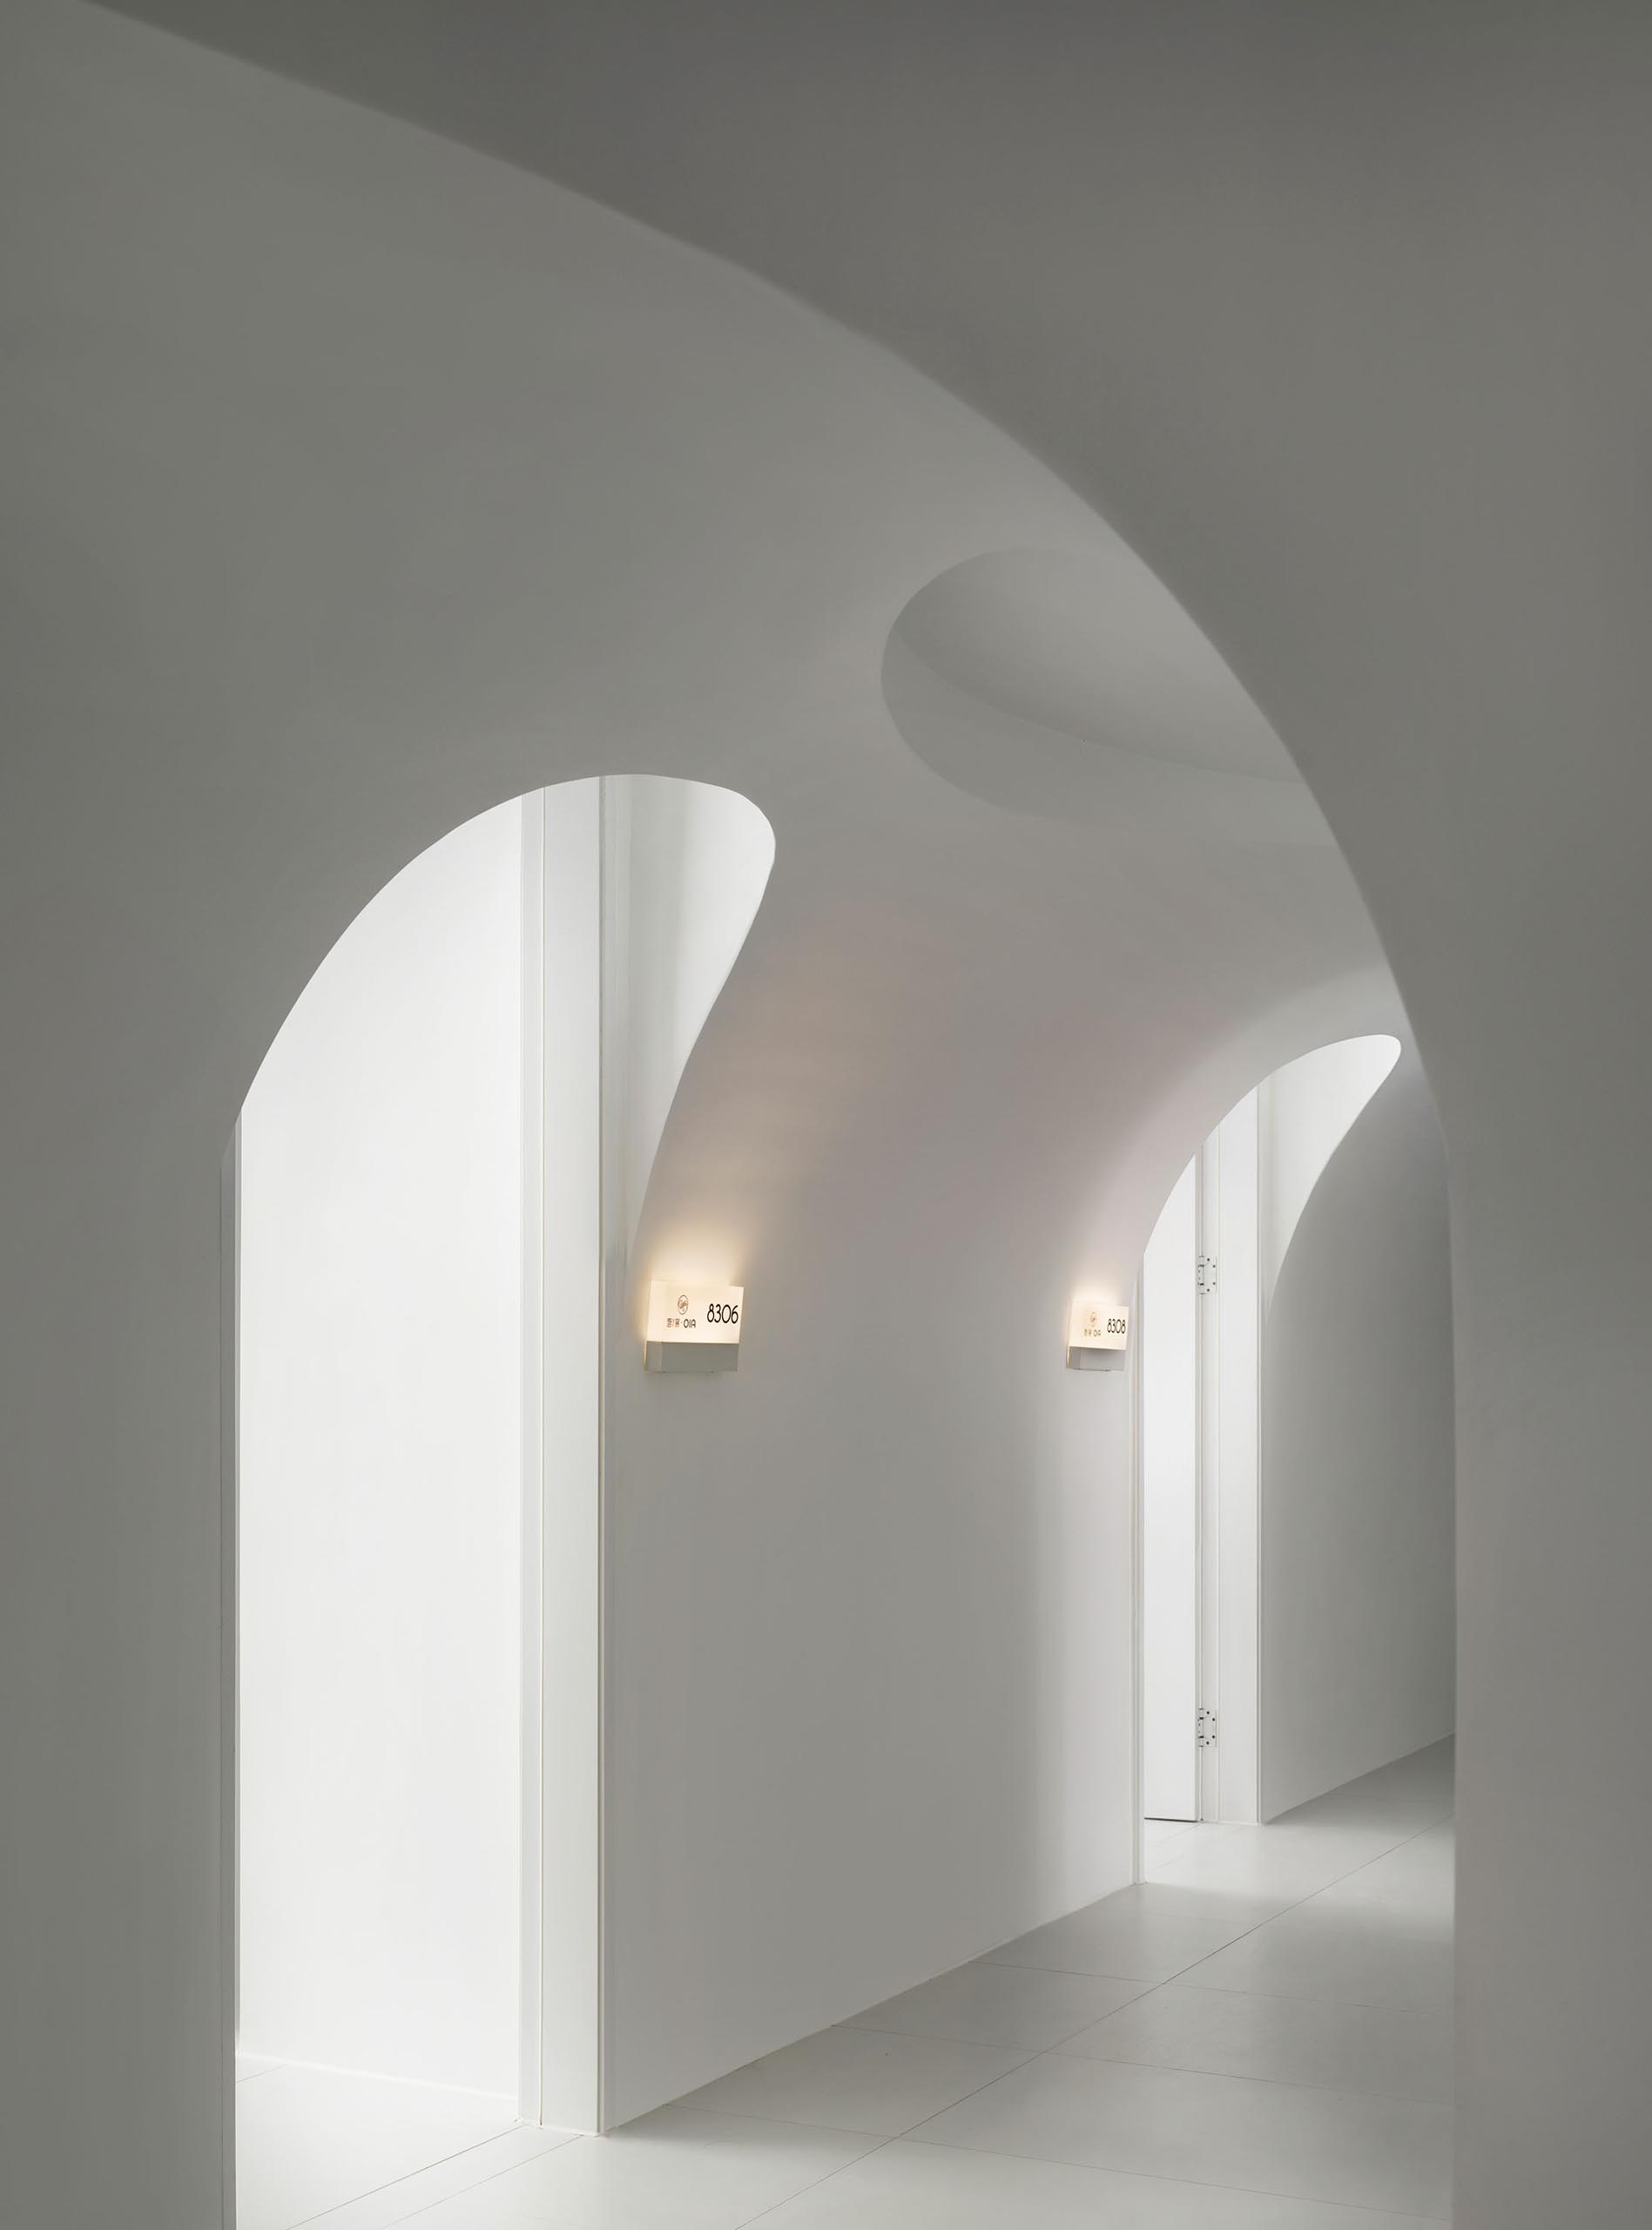 A modern hotel hallway with white walls and arched entryways.